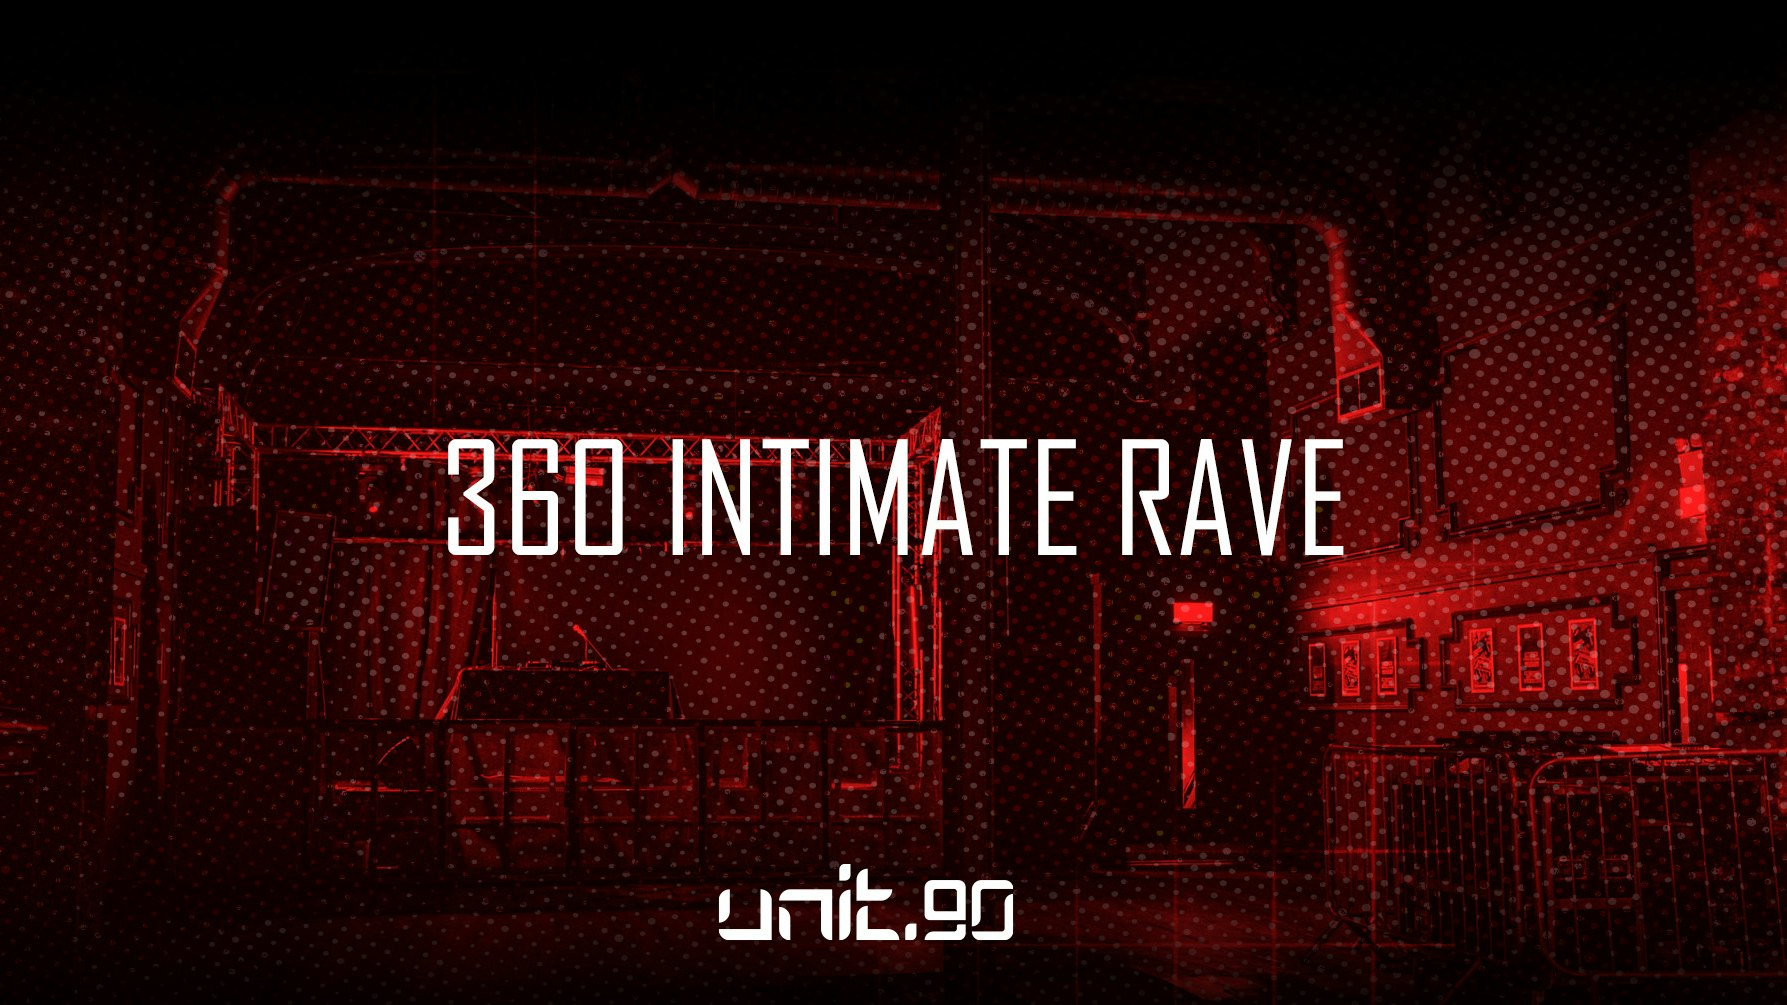 UNIT.90 – 360 INTIMATE RAVE ♦️ 2000 CAPACITY SUPERCLUB // 3 ARENAS OF MUSIC // £2.50 DOUBLES ALL NIGHT